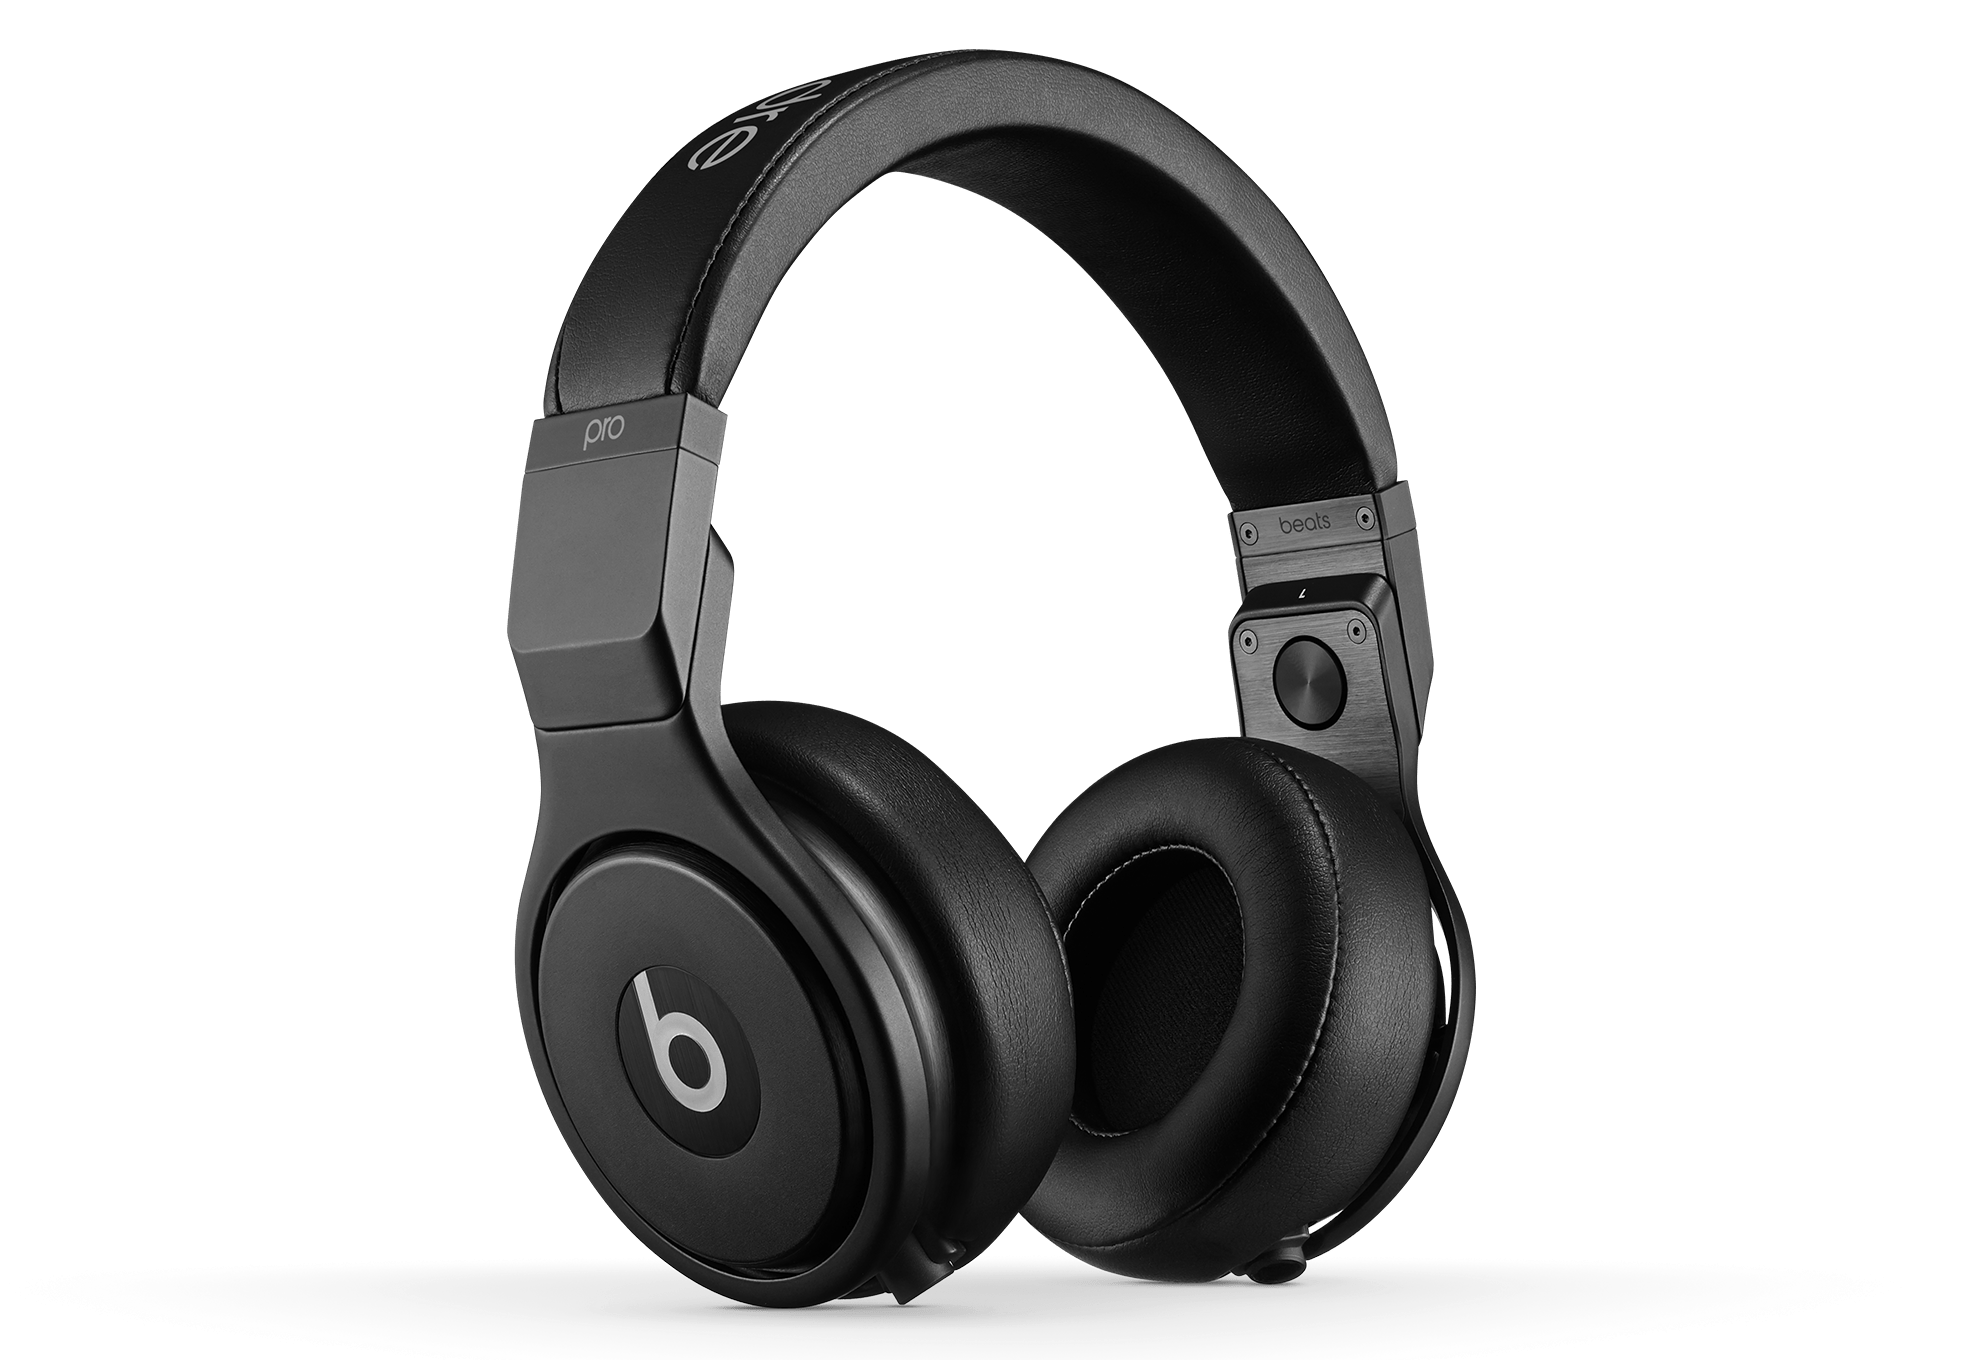 when did the beats pro come out